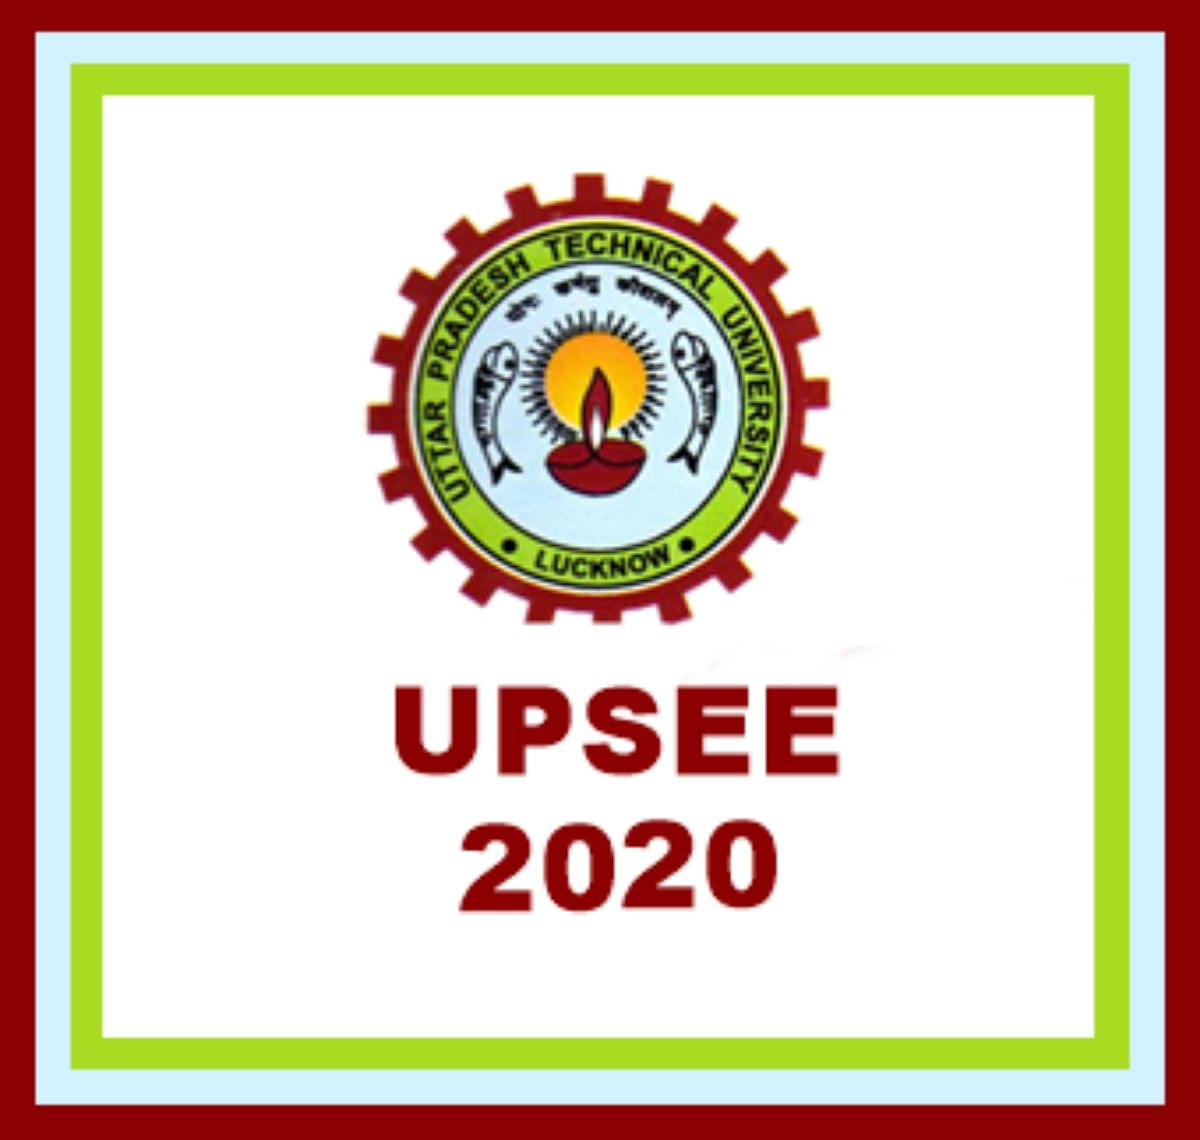 UPSEE 2020: Extended Application Deadline Ends Today, Exam Details Here